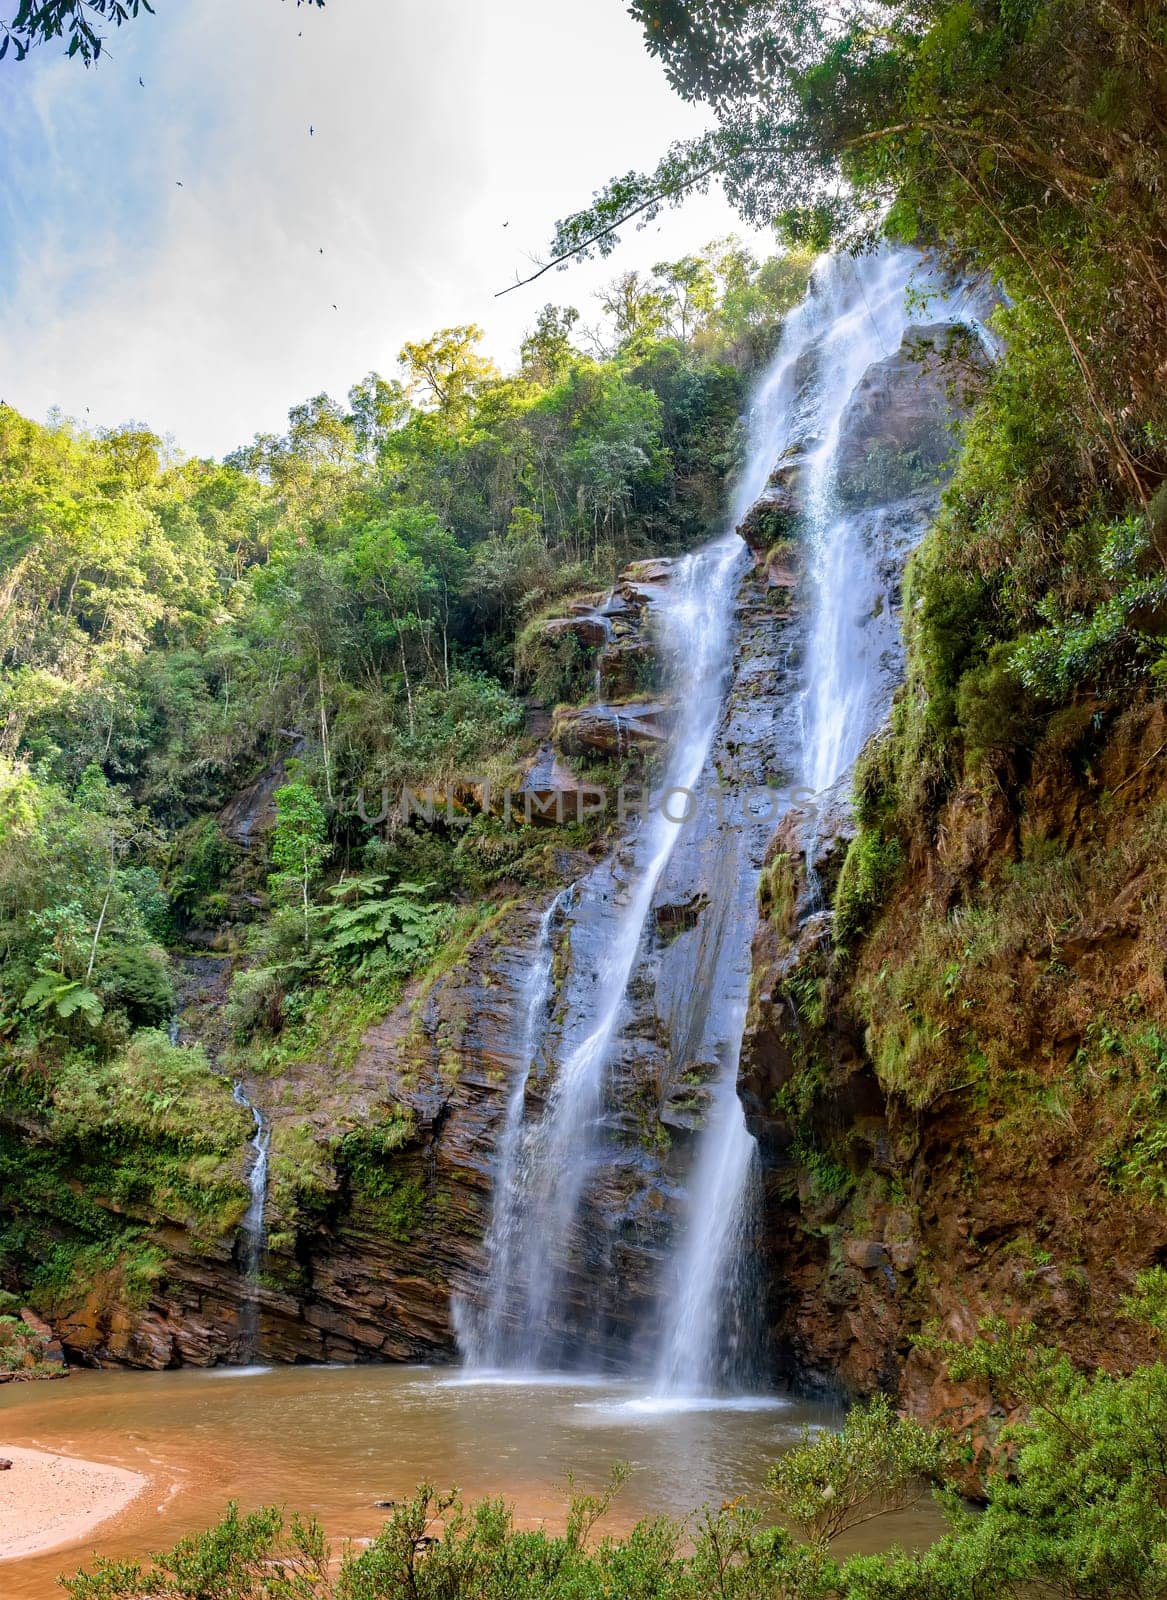 Stunning waterfall among the dense vegetation and rocks of the rainforest in the state of Minas Gerais, Brazil